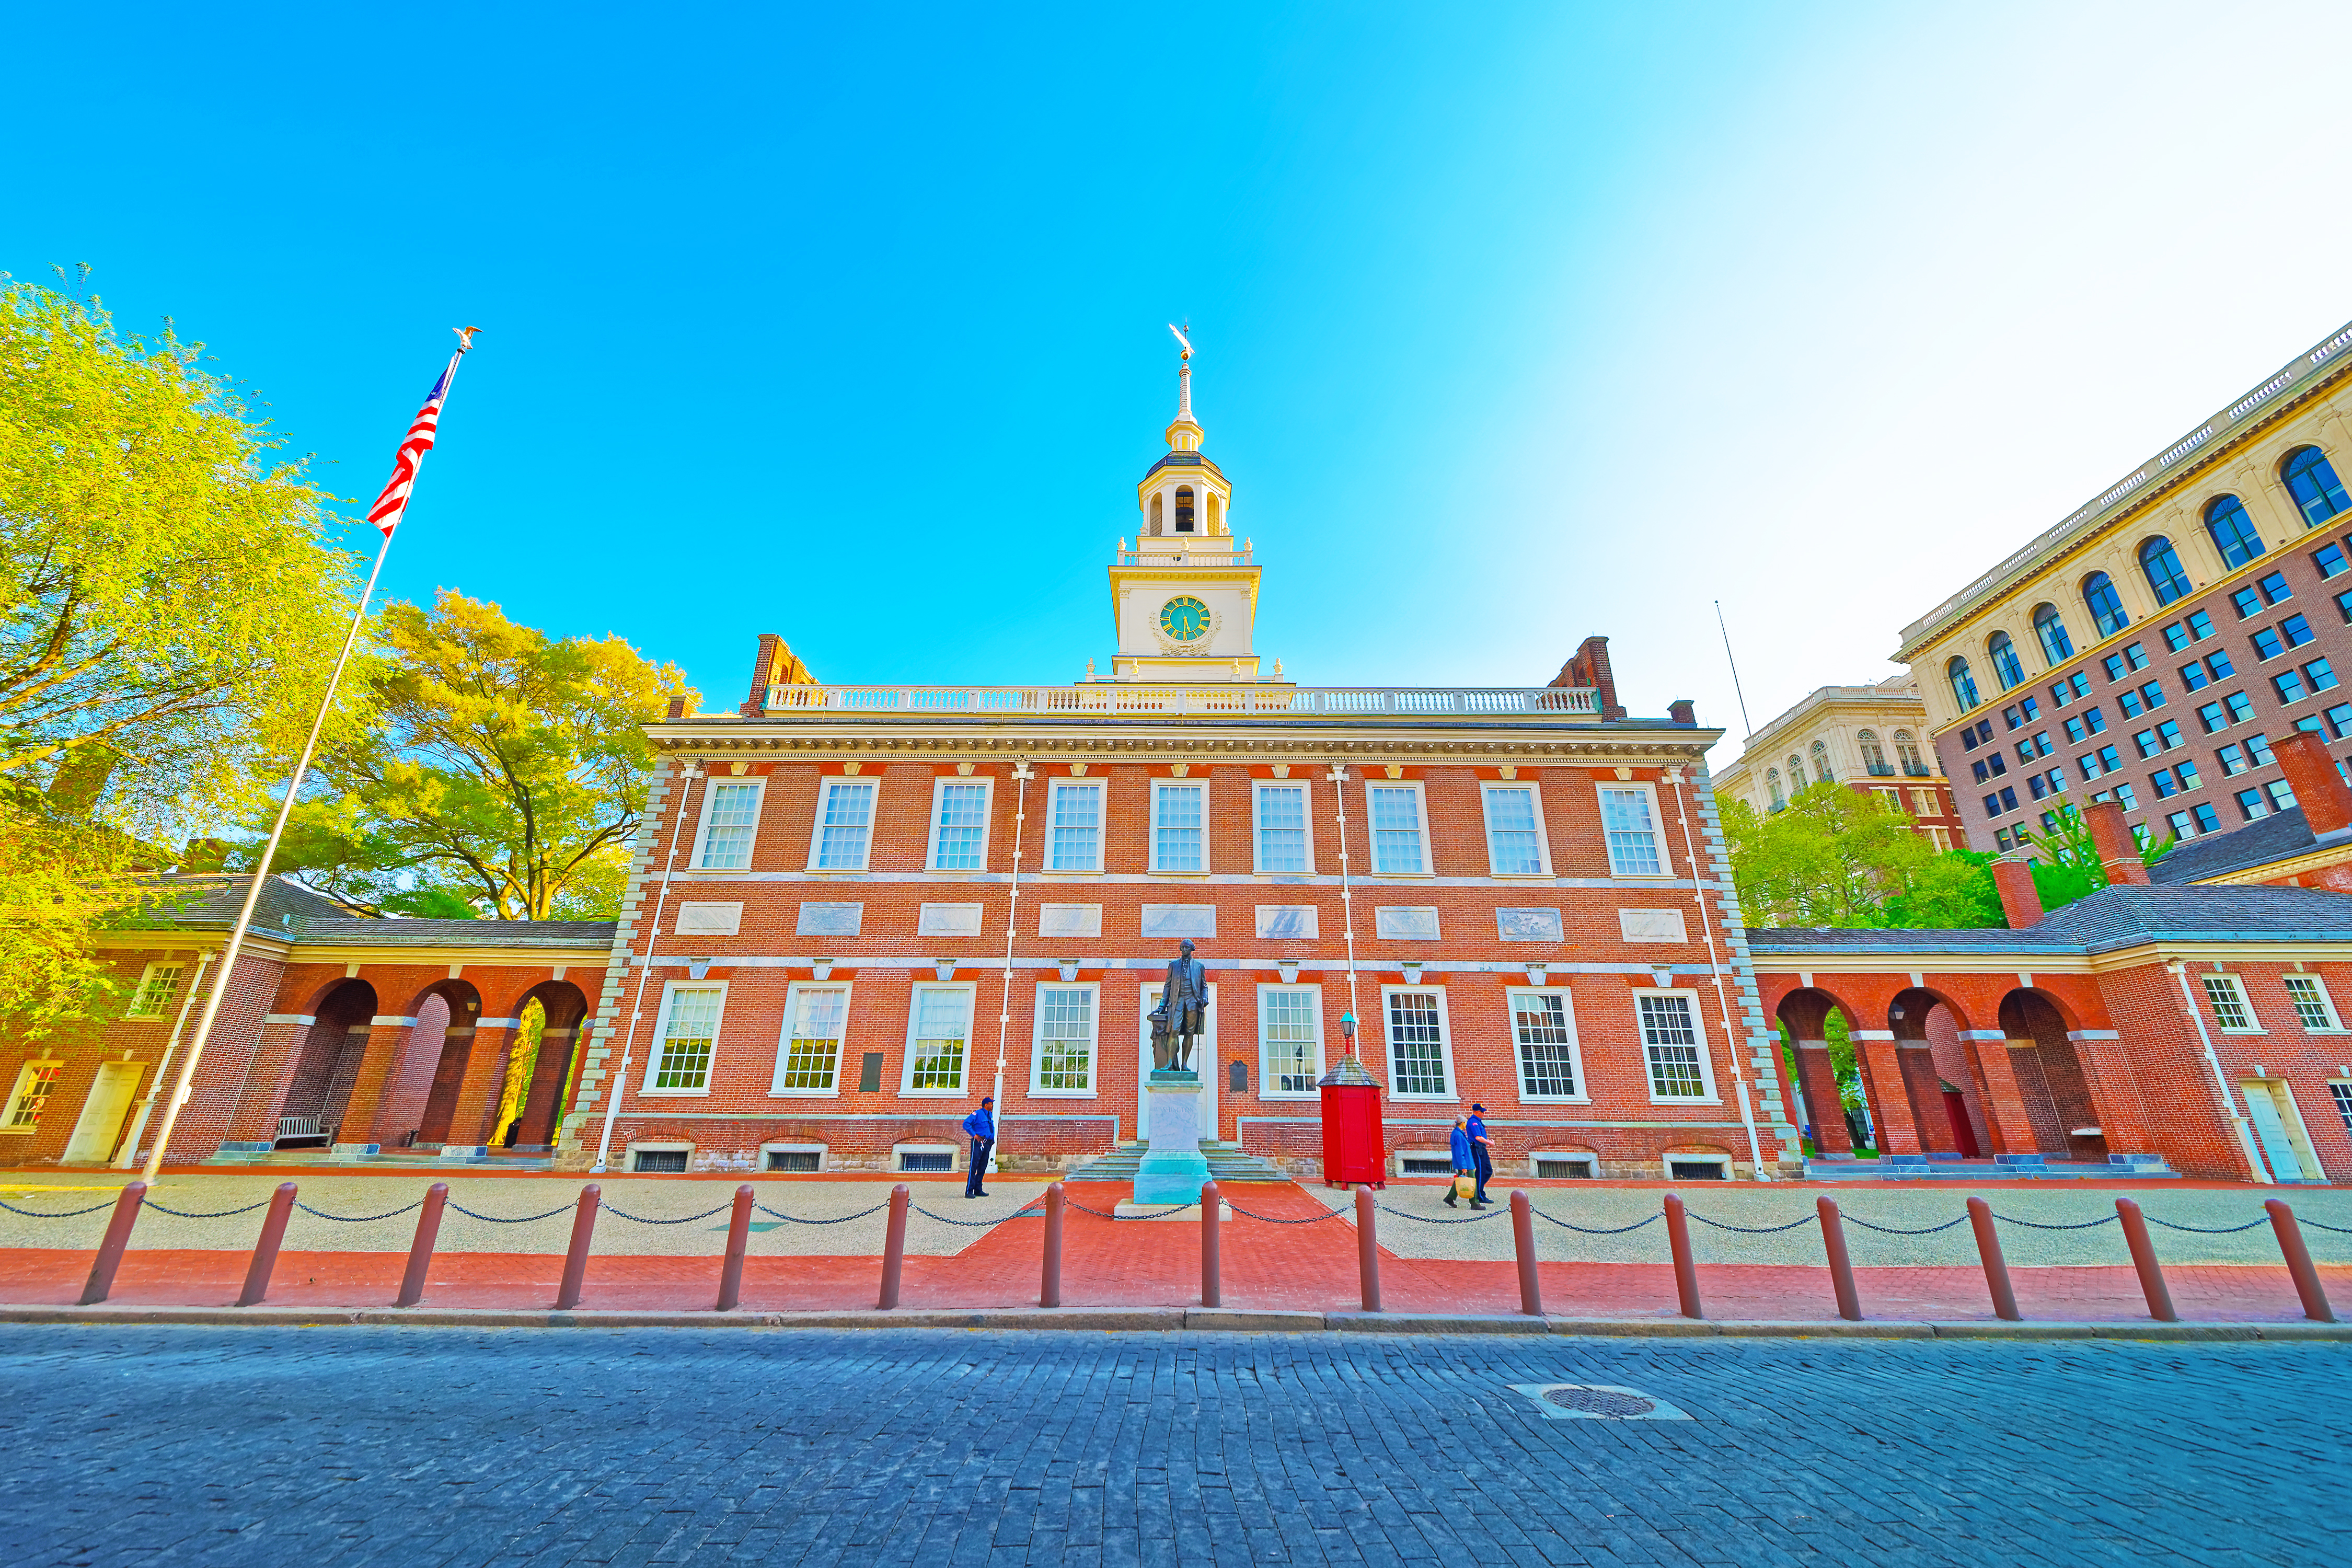 "Independence Hall in Philadelphia on a sunny day"